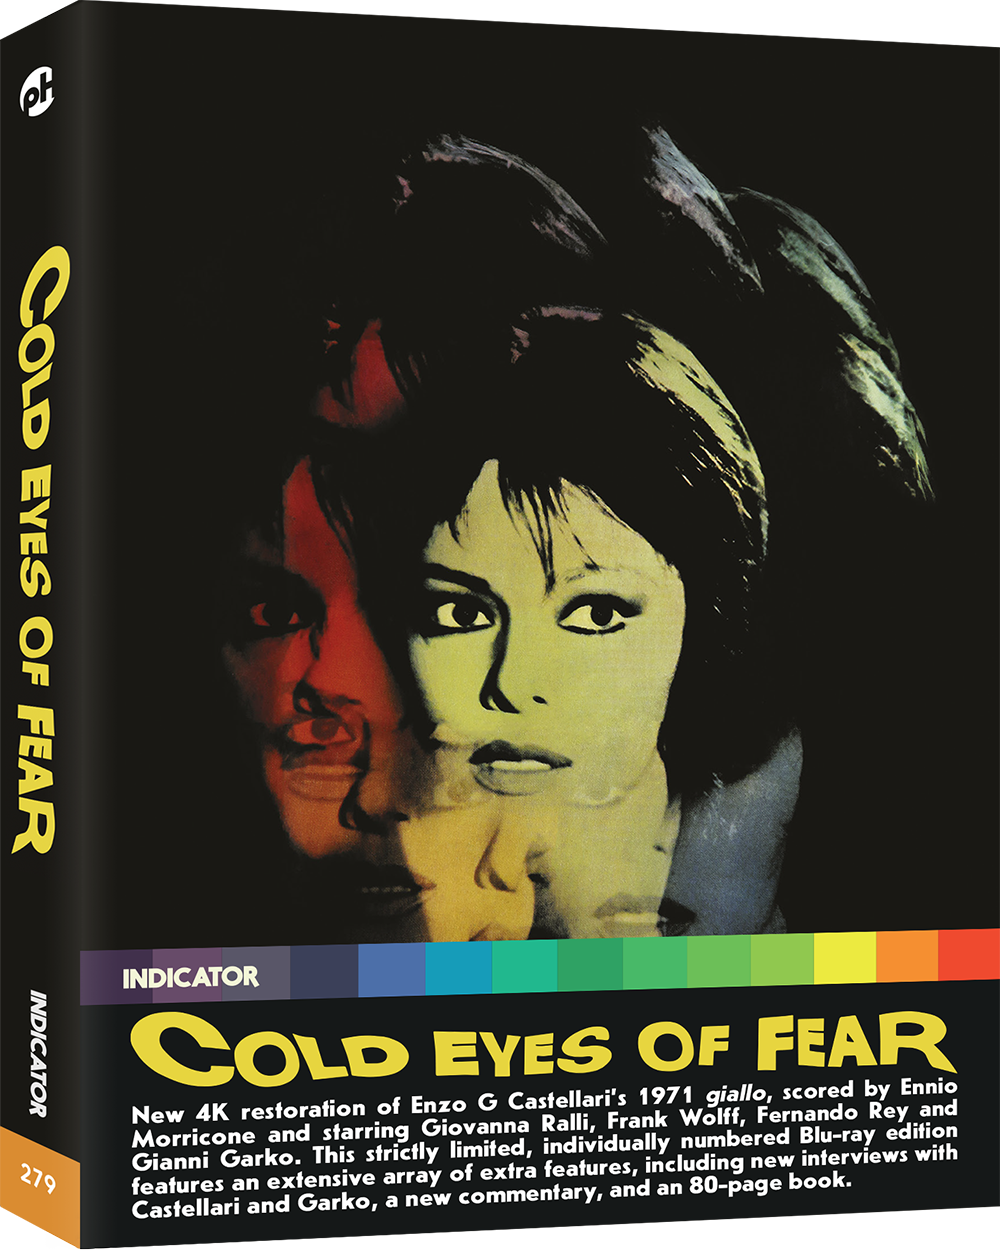 COLD EYES OF FEAR - Blu-ray LE [US]